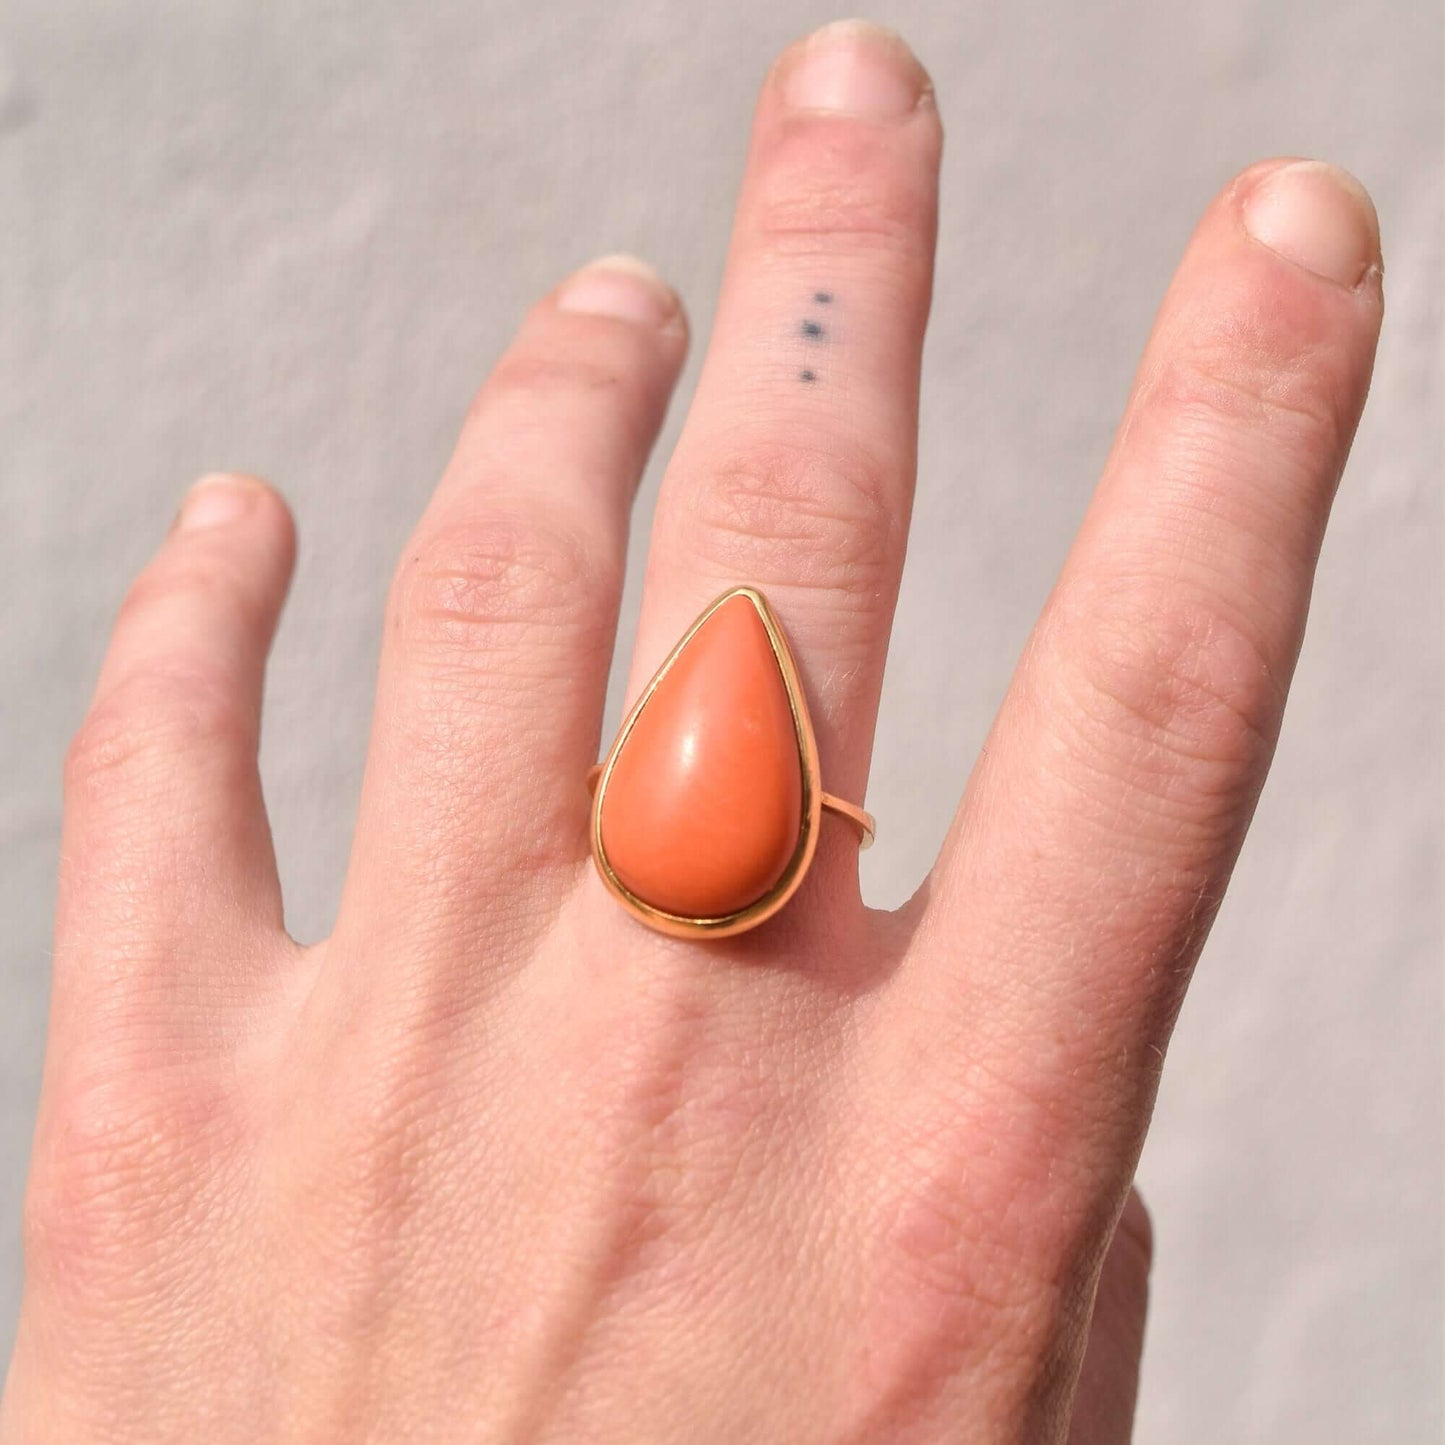 18K Pear Coral Cabochon Ring In Yellow Gold, Teardrop Setting, Statement Ring, Estate Jewelry, 7 3/4 US